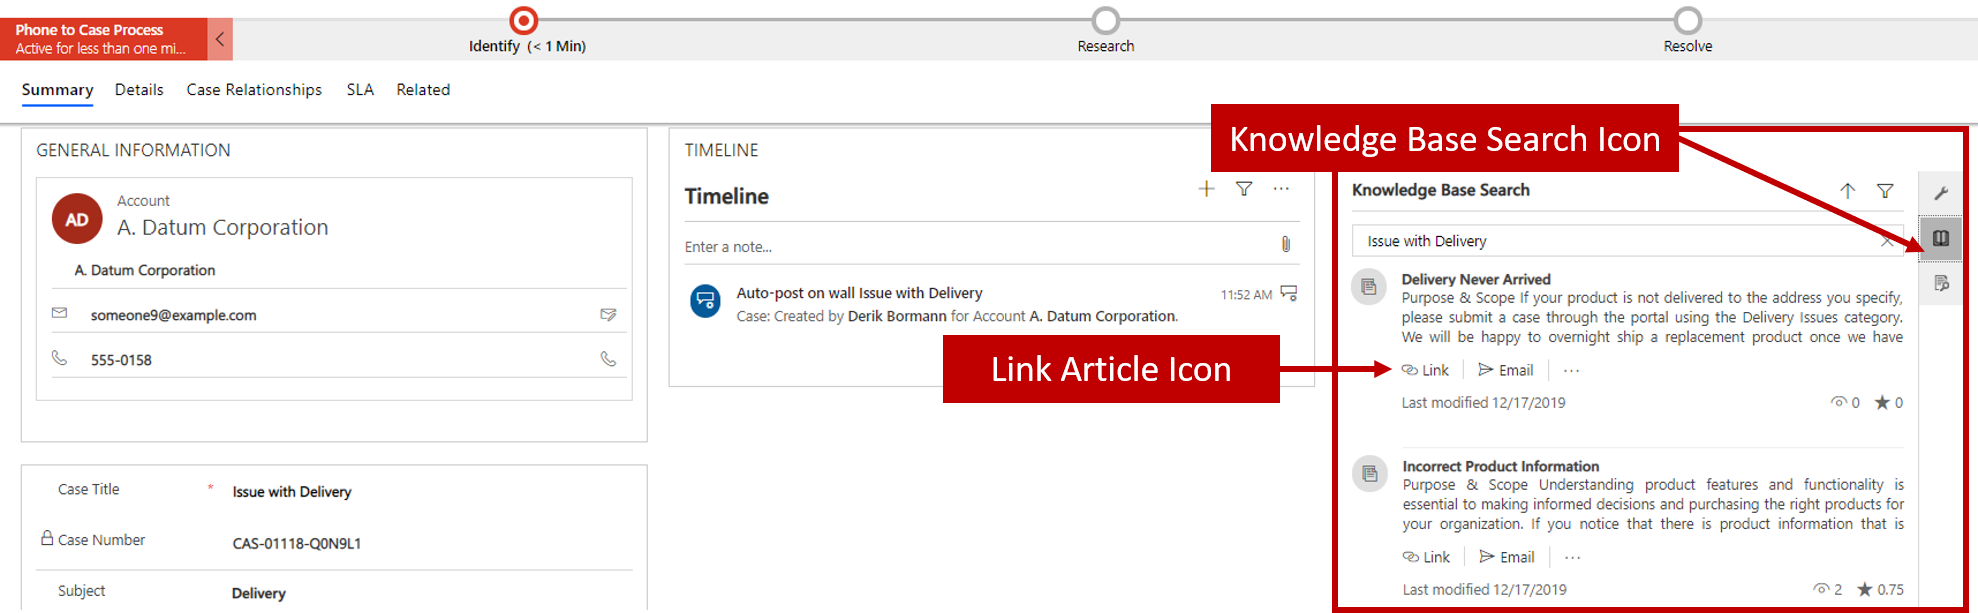 Screenshot of the Related section with Knowledge Base Search Icon and Link Article Icon.